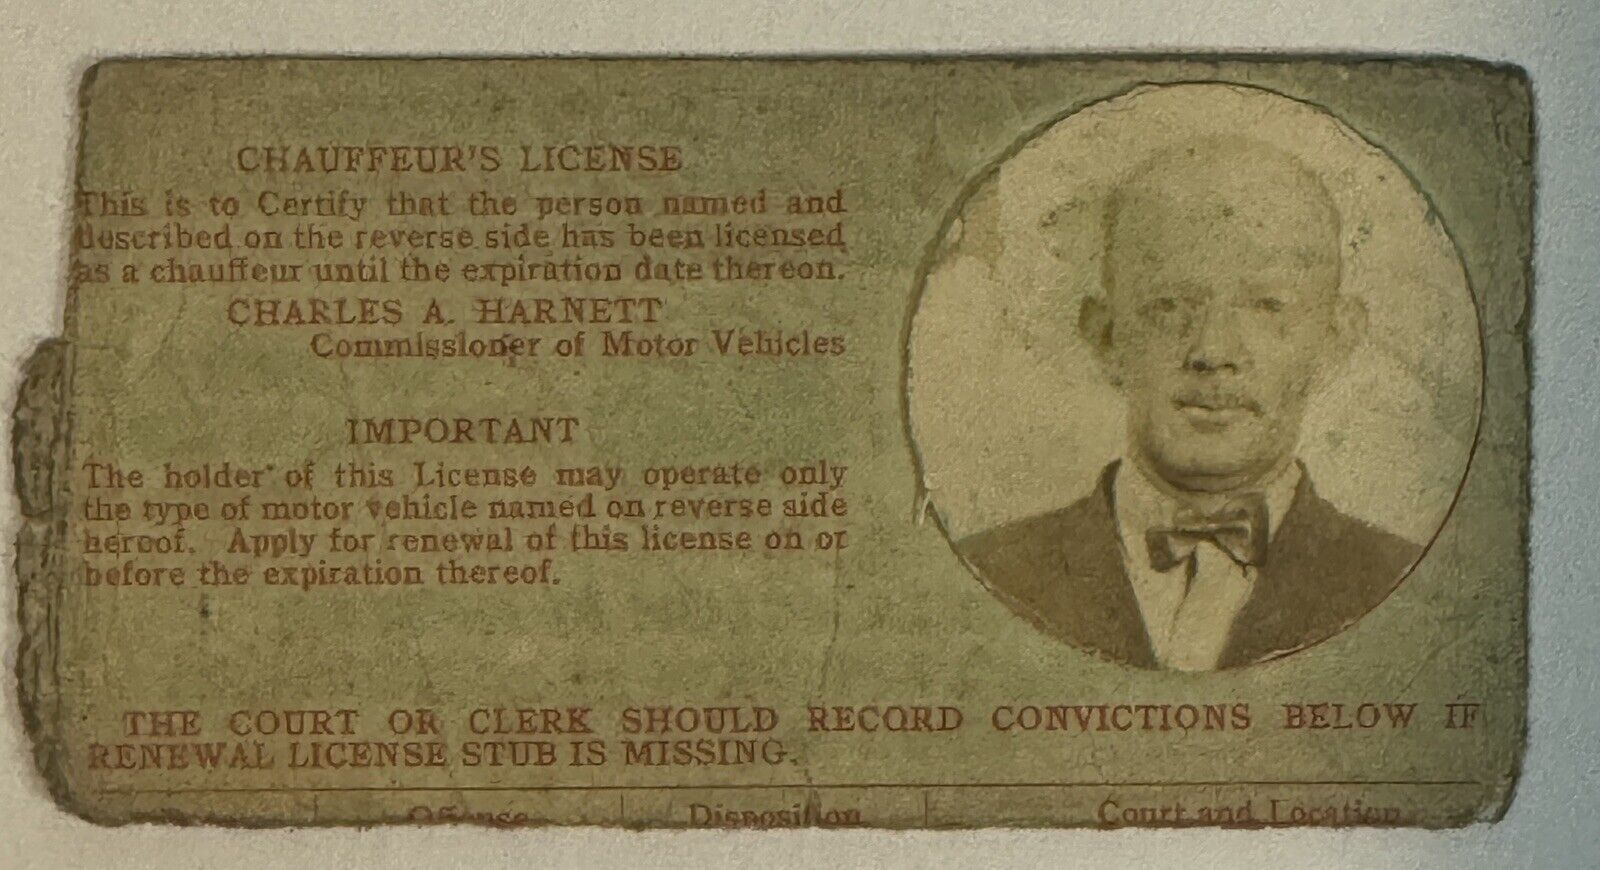 Chauffeurs License Franklin NY New York Damaged Very Old